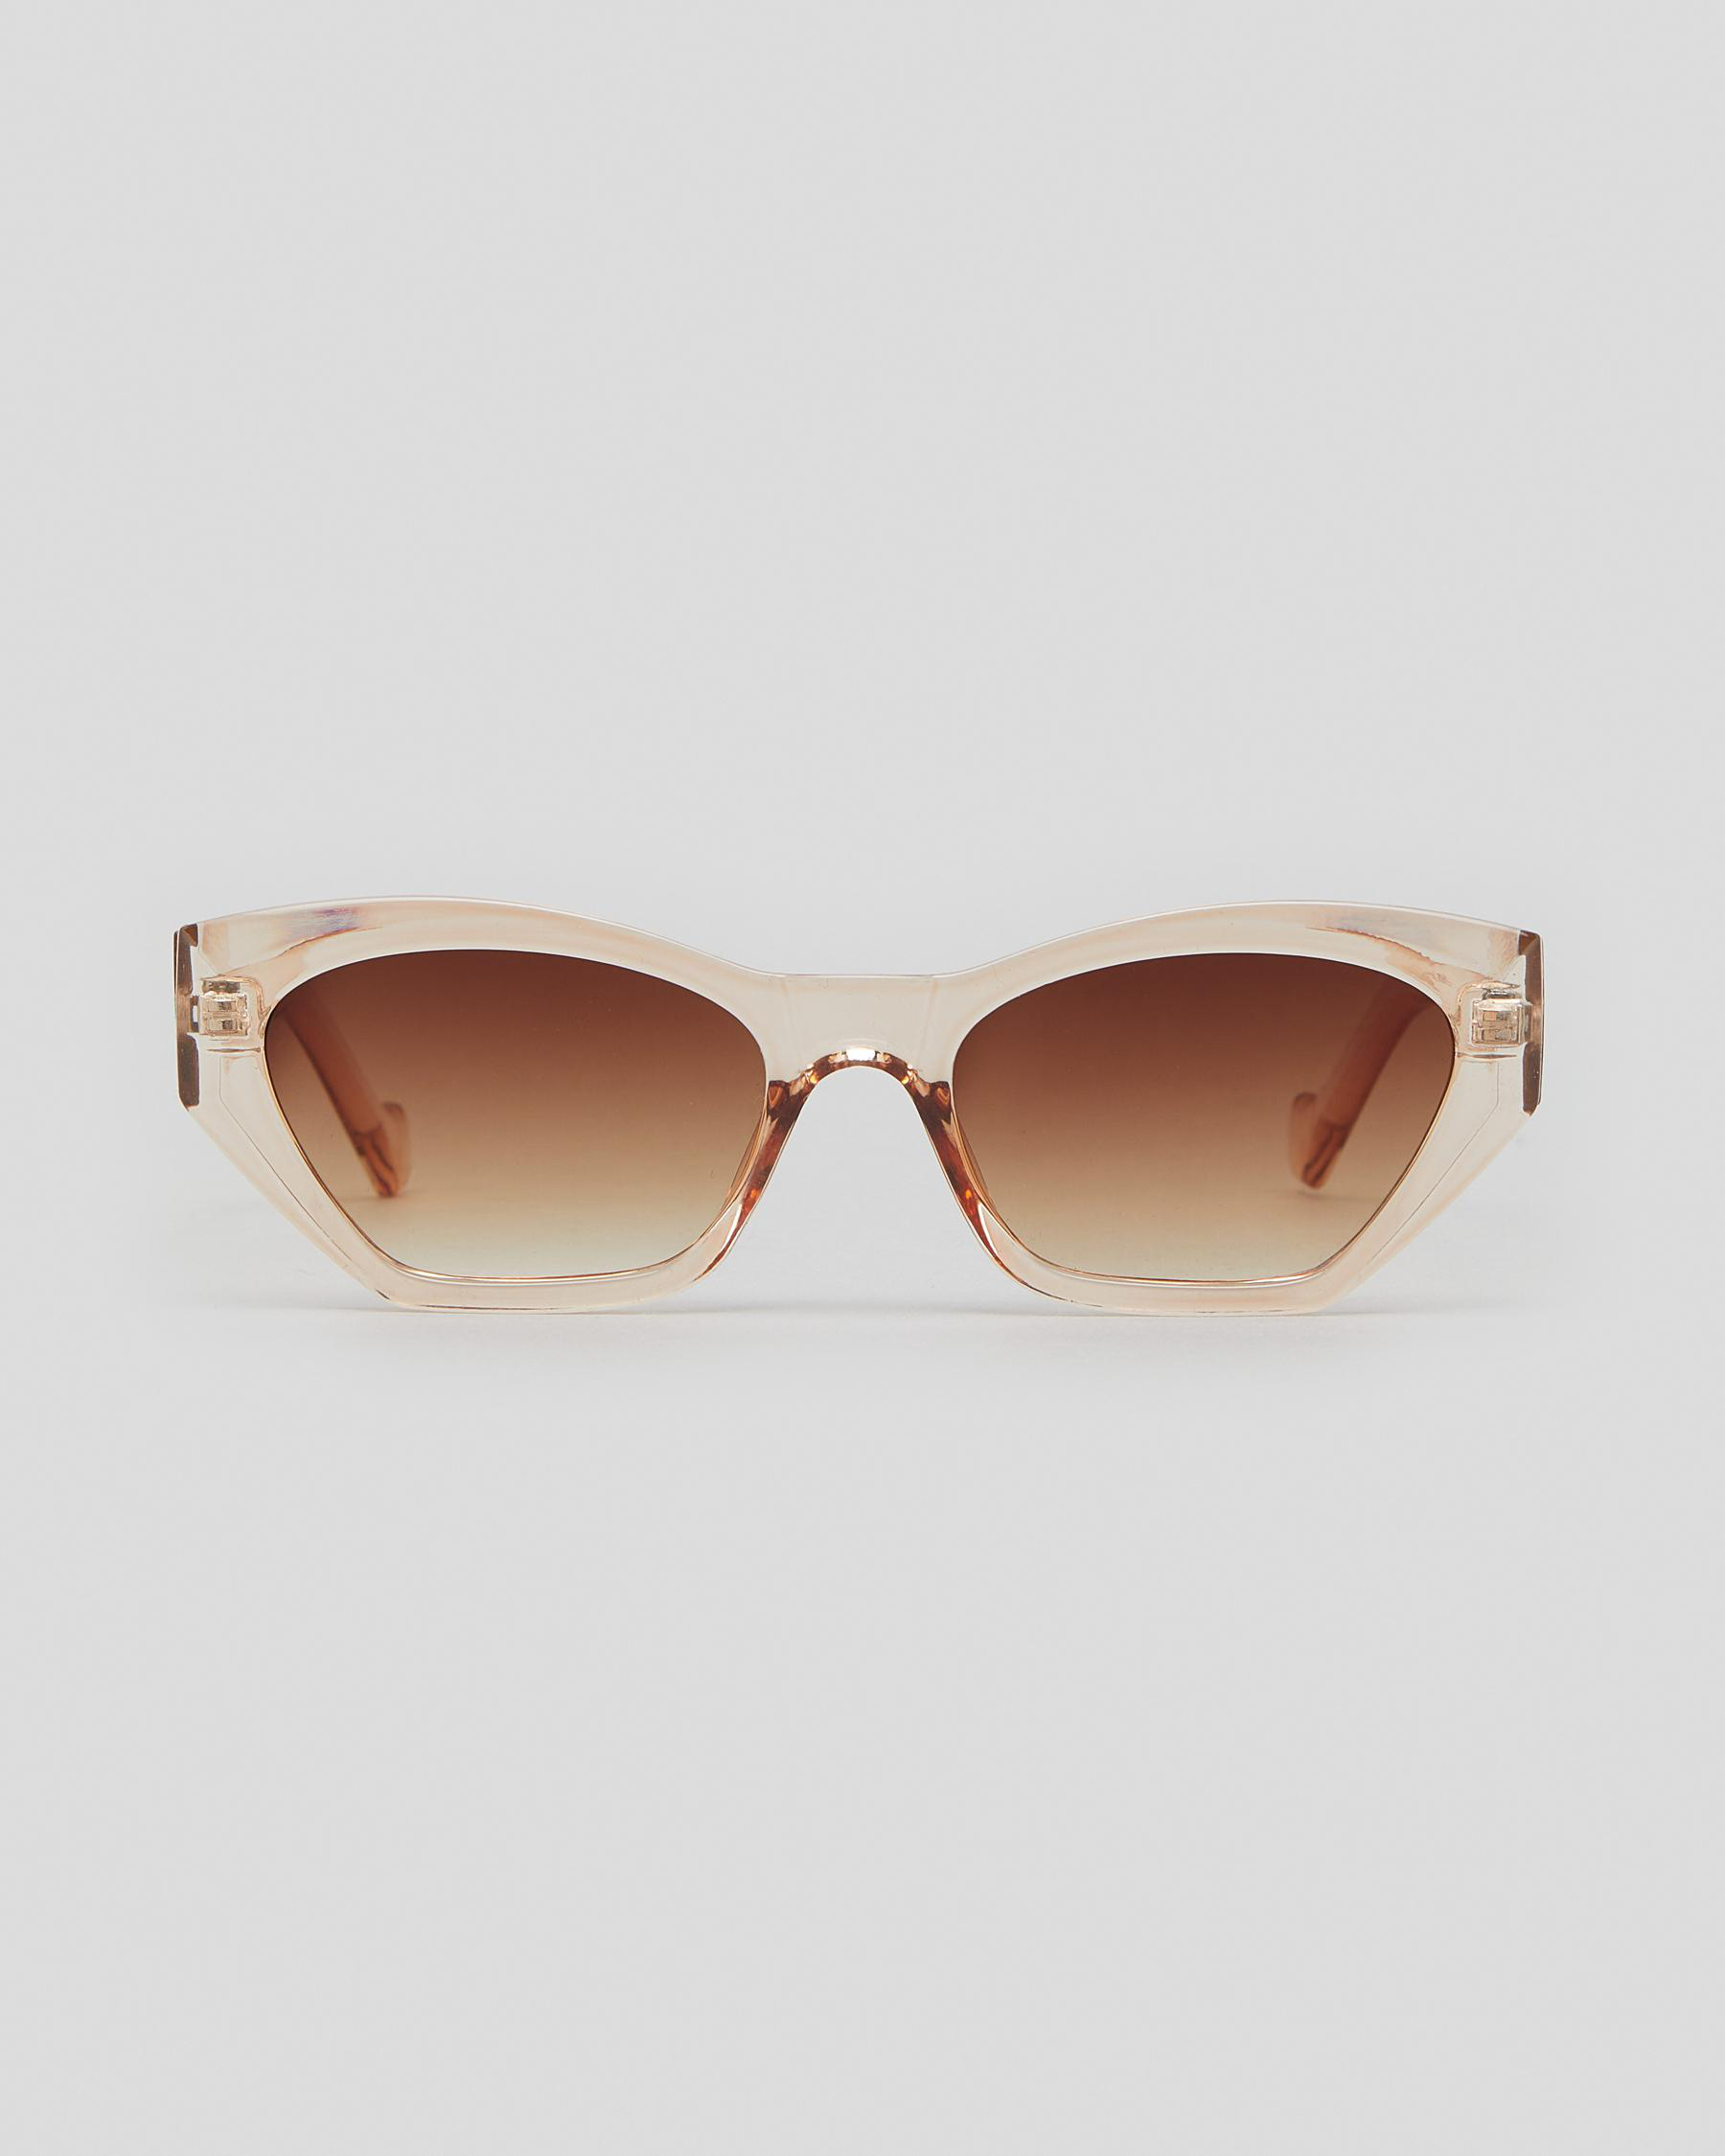 Indie Eyewear Brittany Sunglasses In Light Brown - FREE* Shipping ...